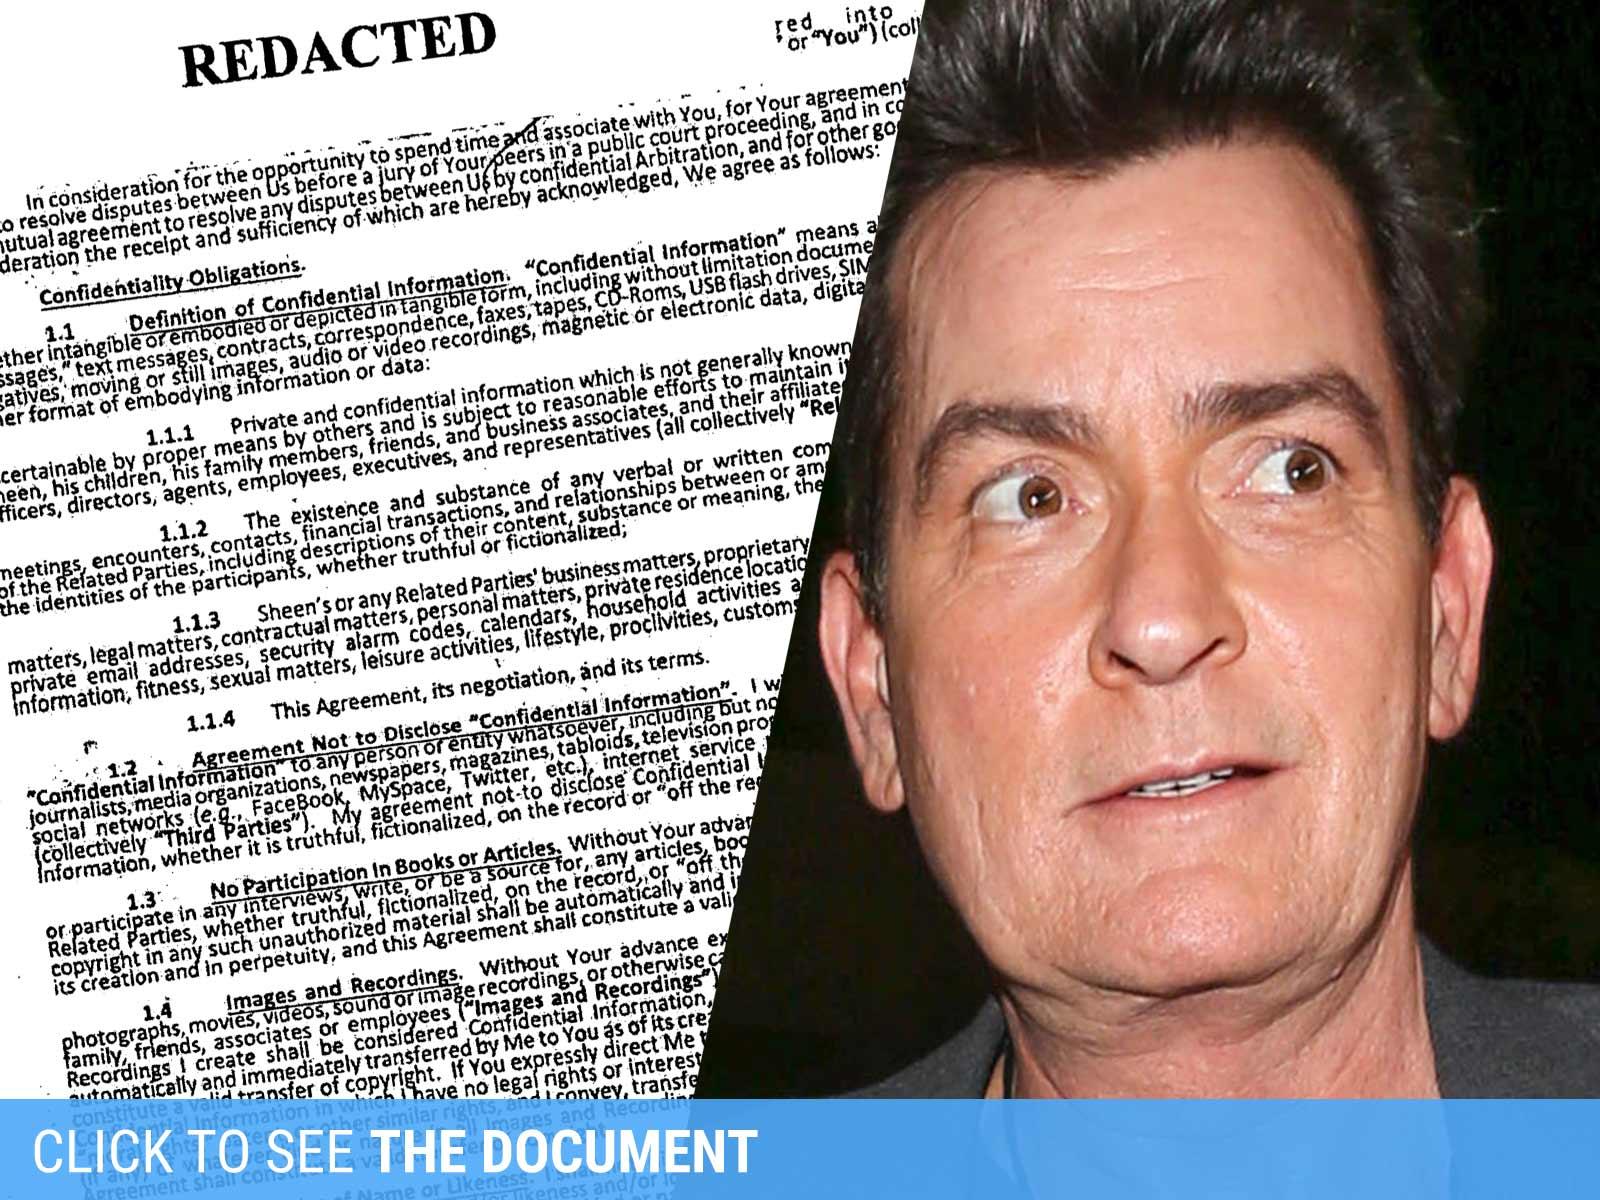 Charlie Sheen’s ‘Hooker’ Contract Reveals Loose Lips Cost $100,000